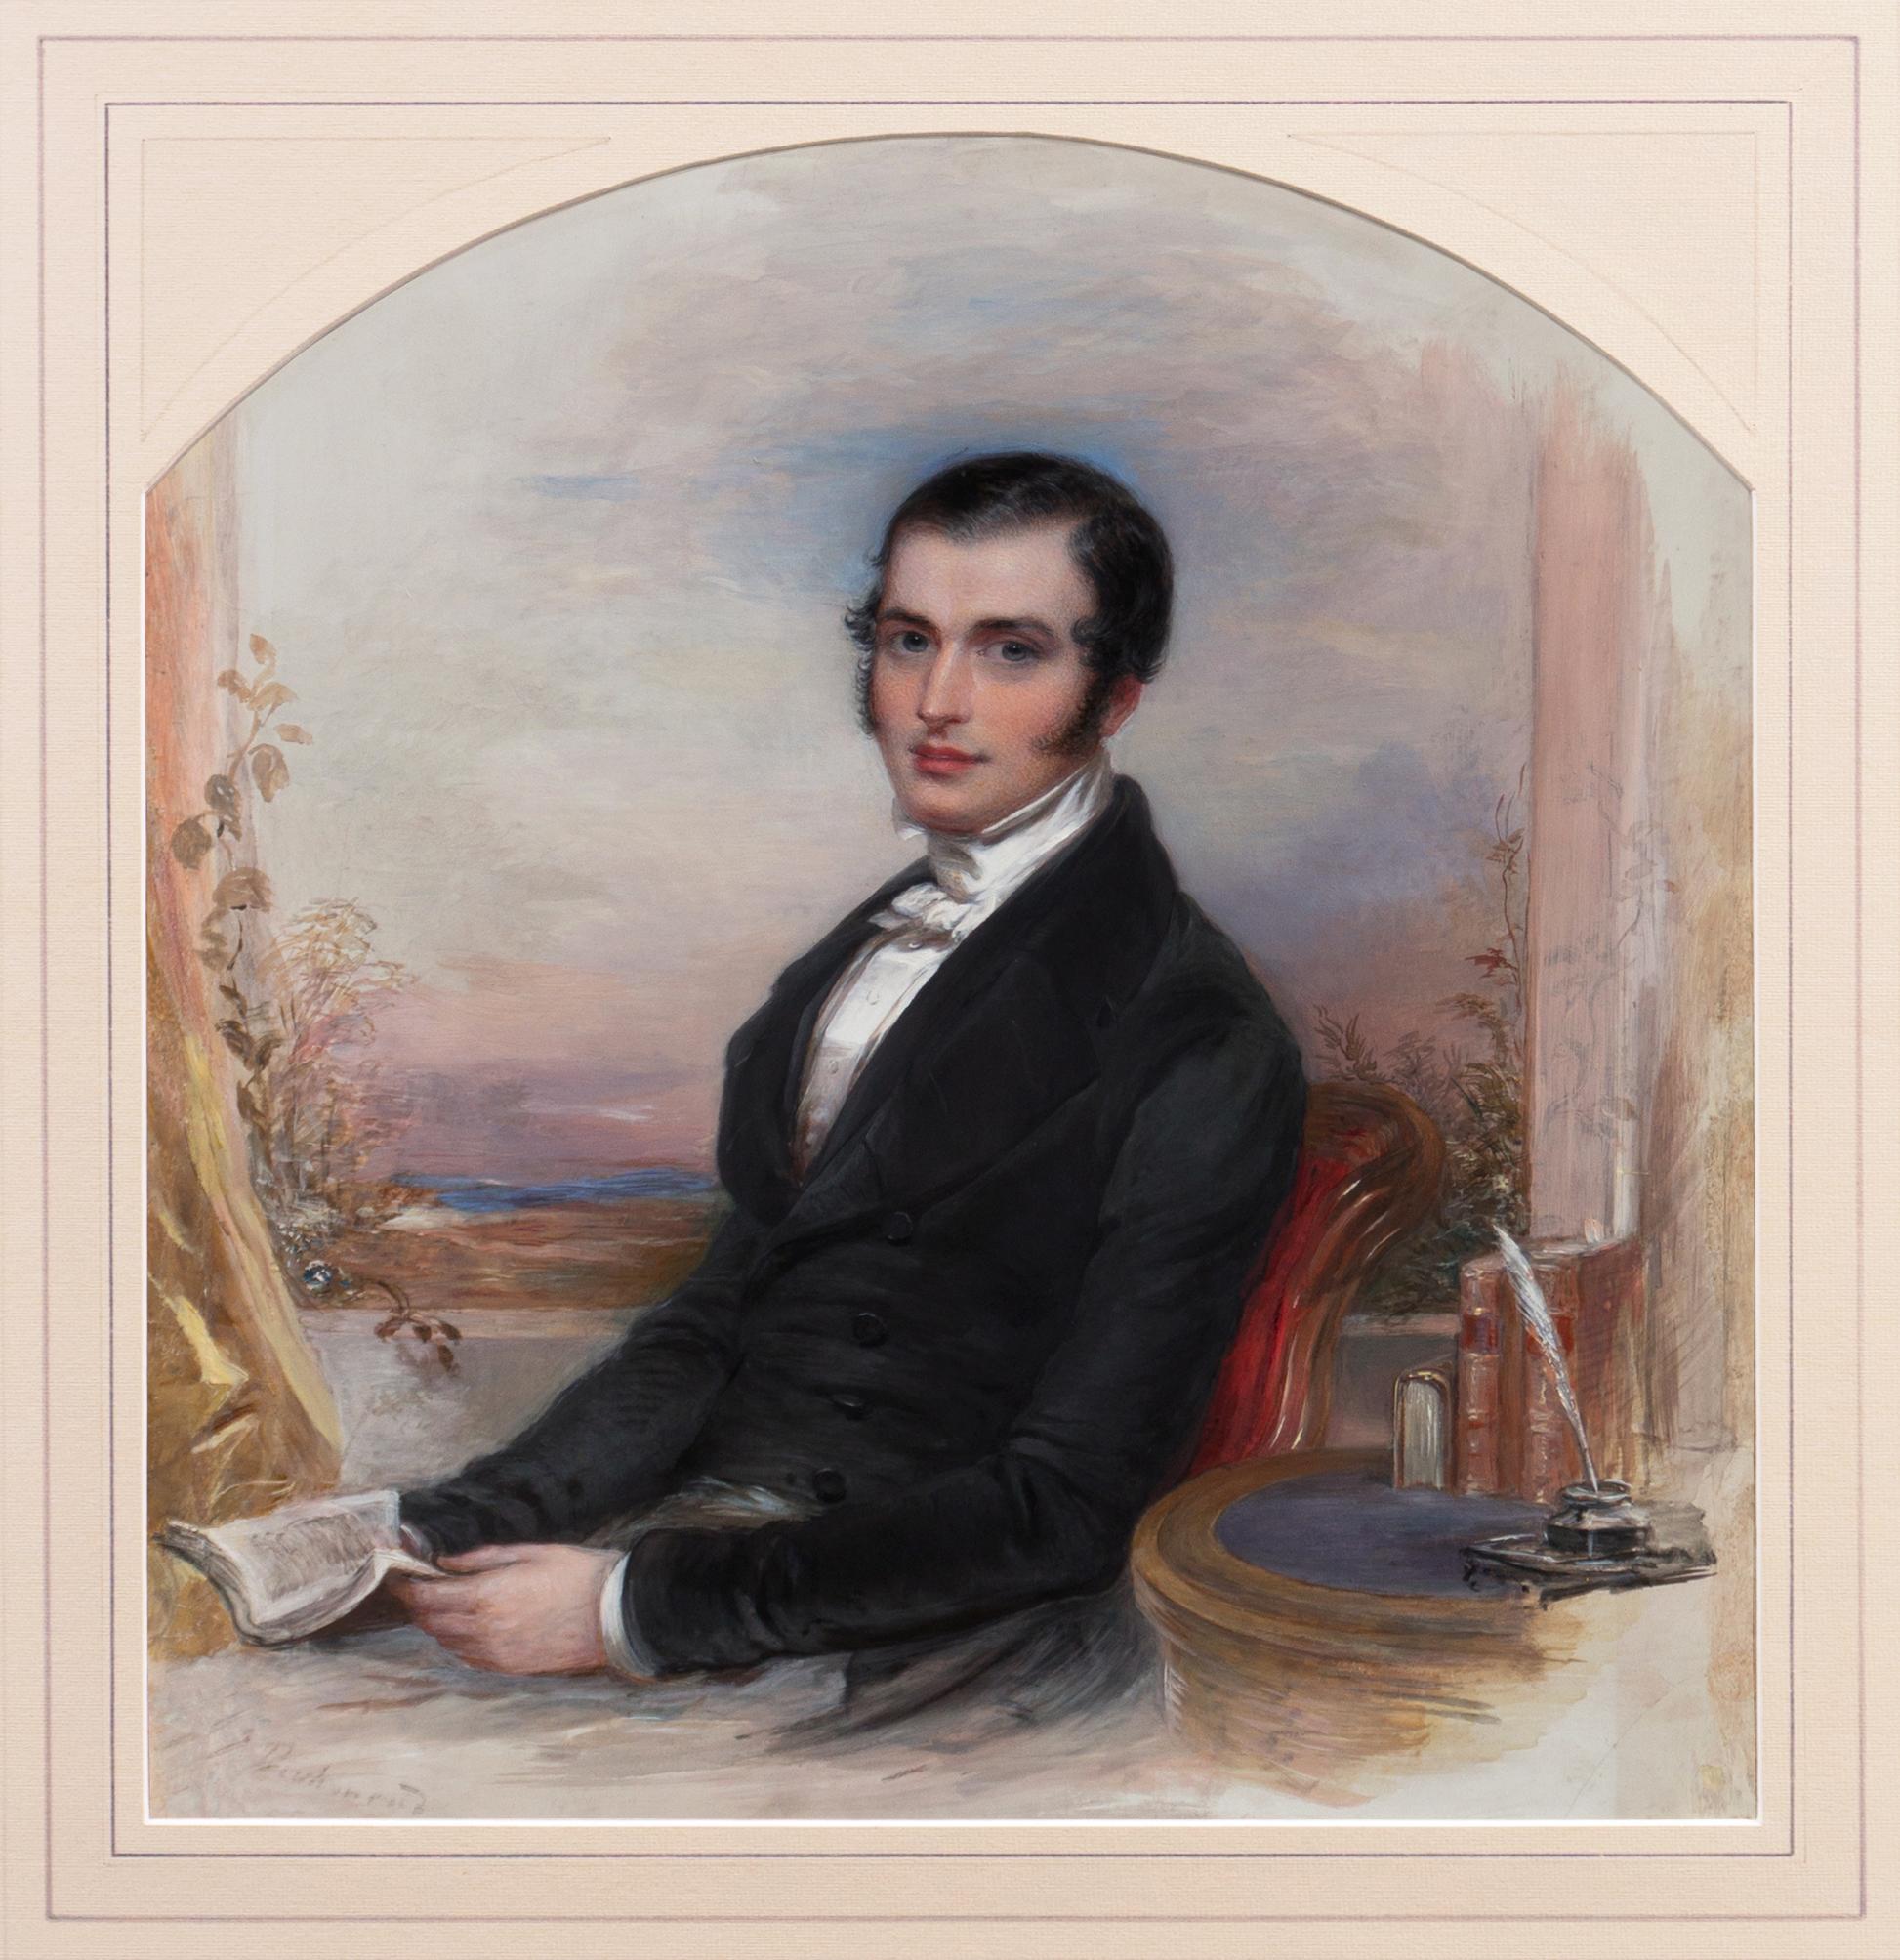 'Portrait of a Gentleman Seated and Reading', Regency, Early Victorian Dandy - Painting by George Richmond